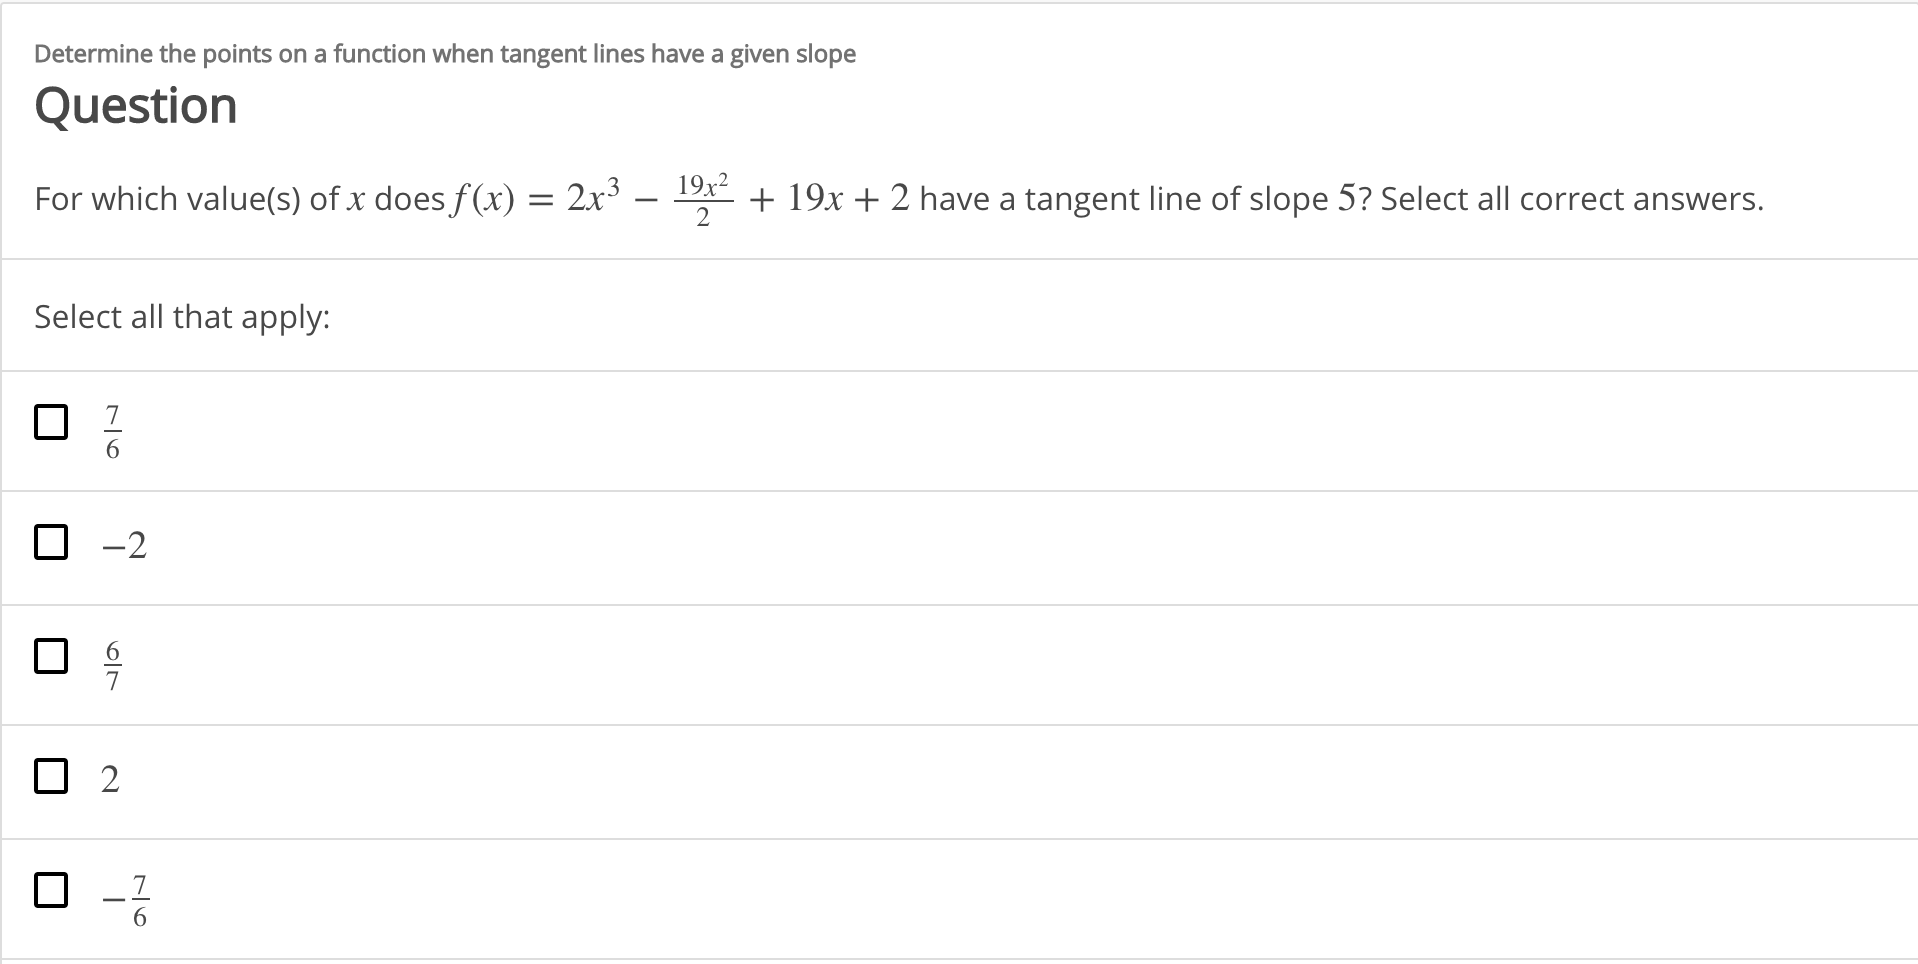 Determine the points on a function when tangent lines have a given slope
Question
19x2
For which value(s) of x does f(x) = 2x³
+ 19x + 2 have a tangent line of slope 5? Select all correct answers.
Select all that apply:
-2
7.
6.
